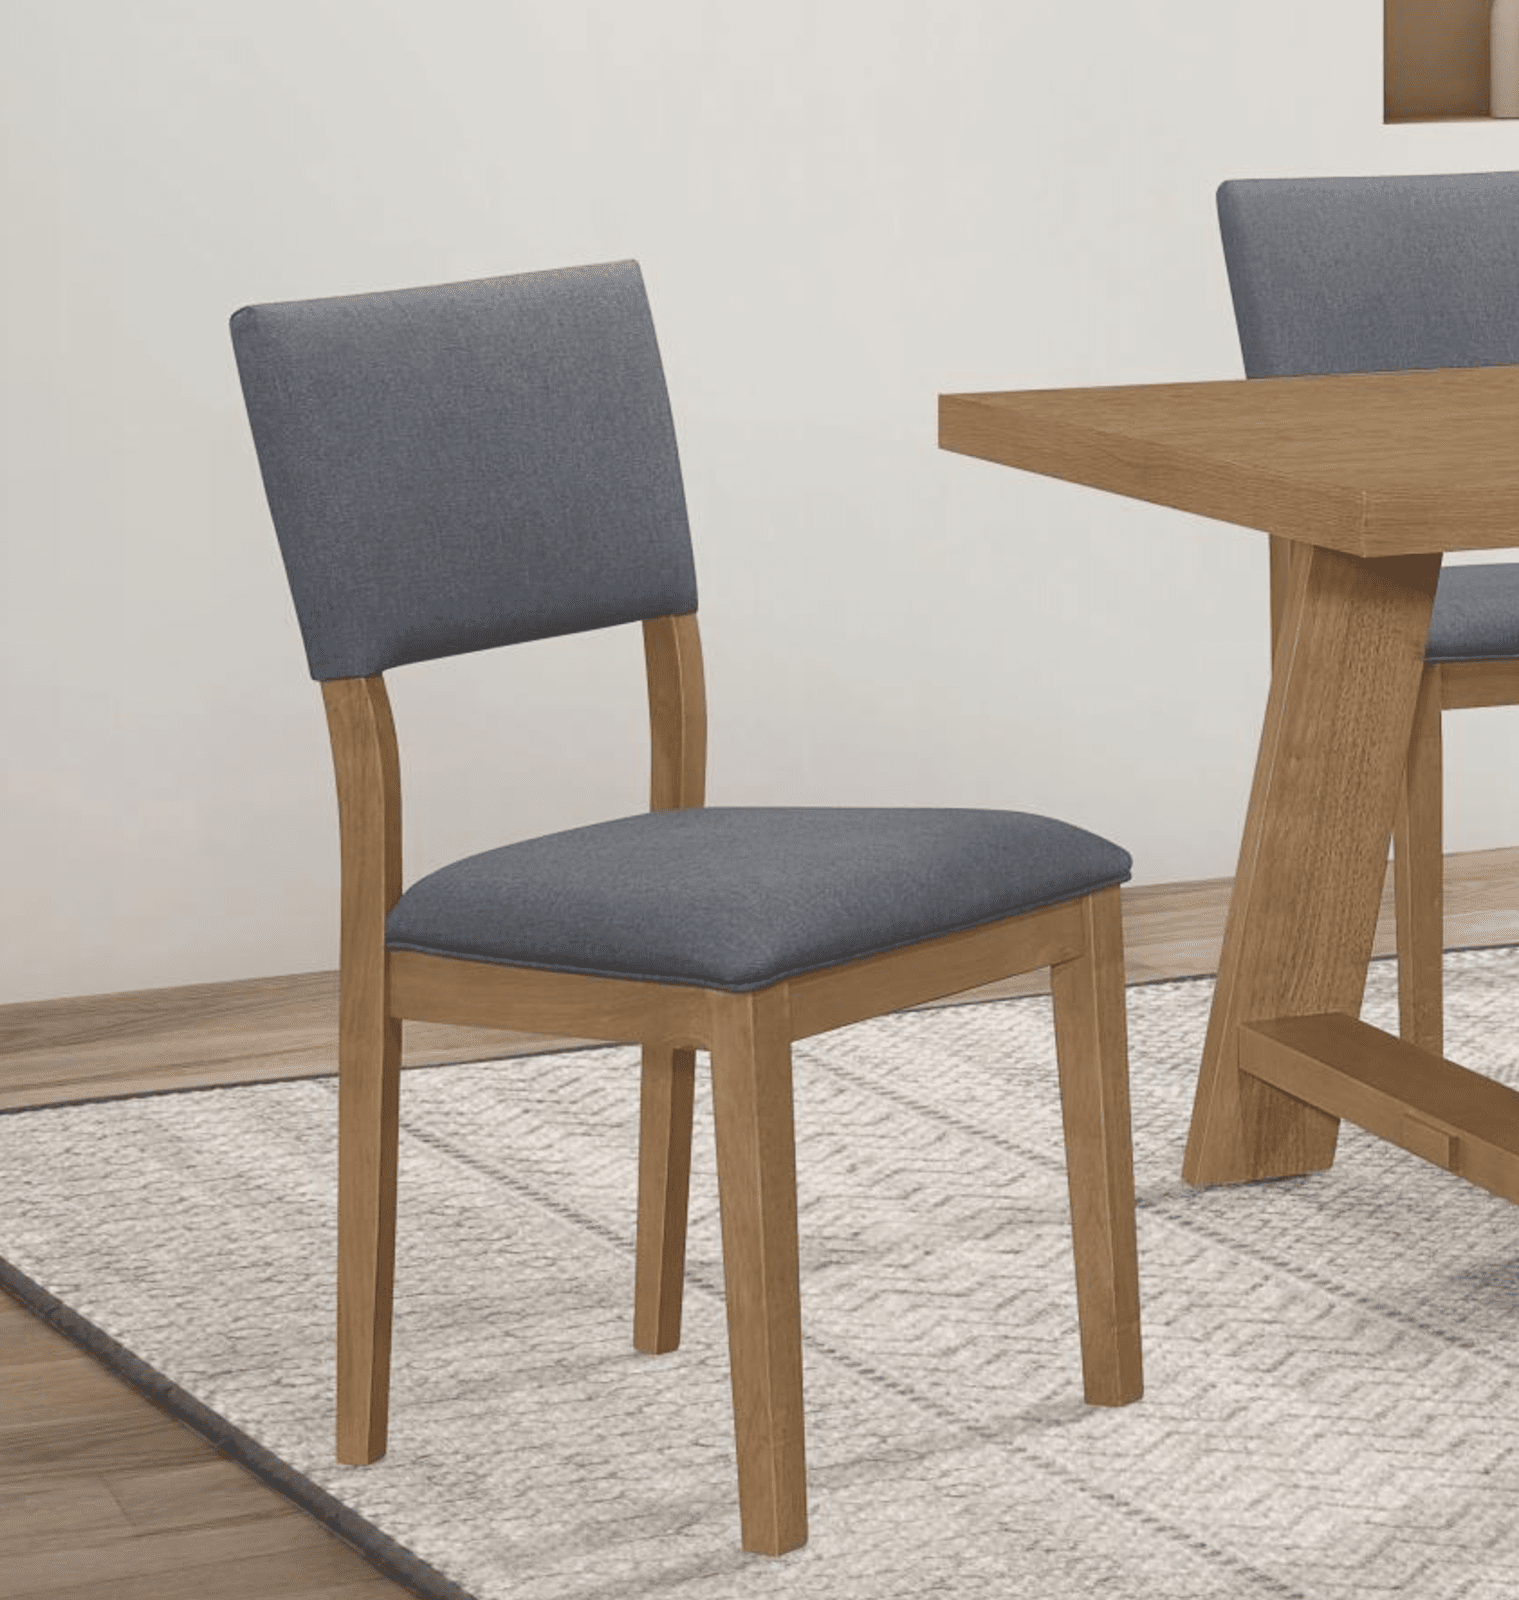 Sharon Open Back Padded Upholstered Dining Side Chair Blue and Brown Set of 2